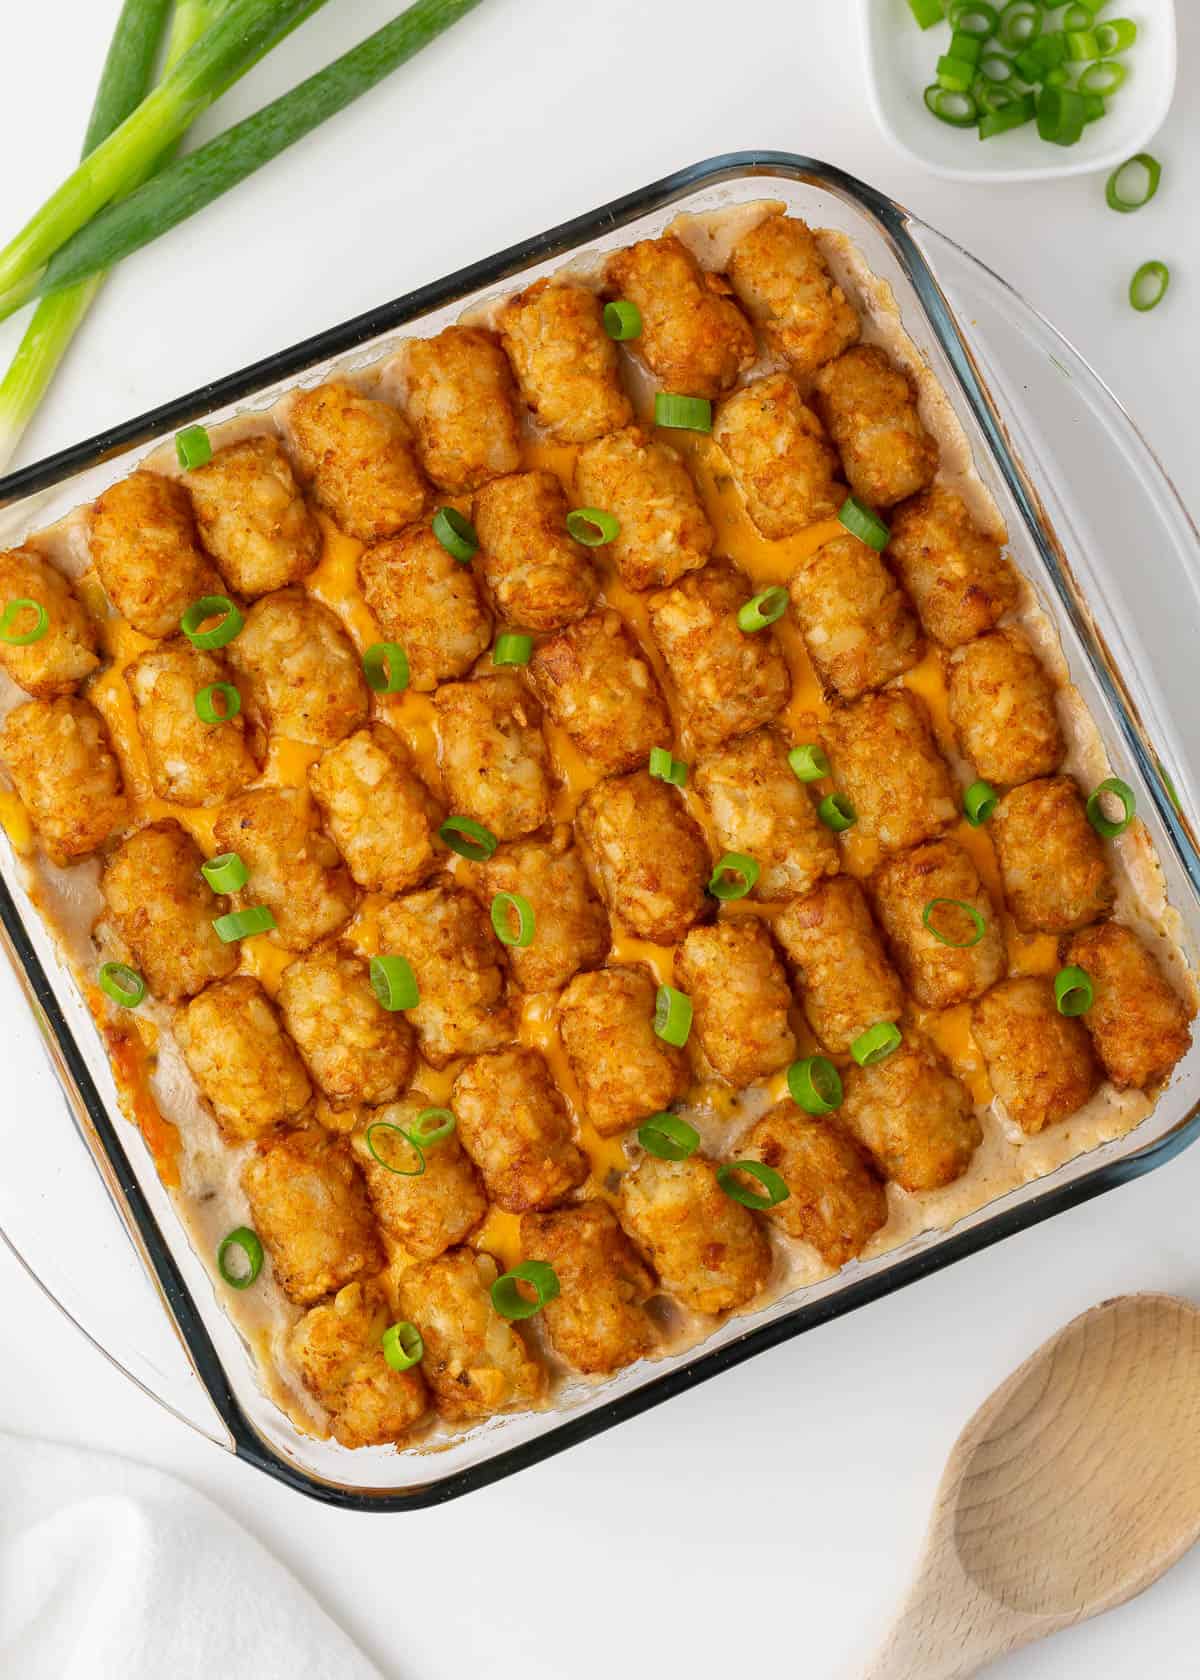 Tater tot casserole in a glass baking dish.